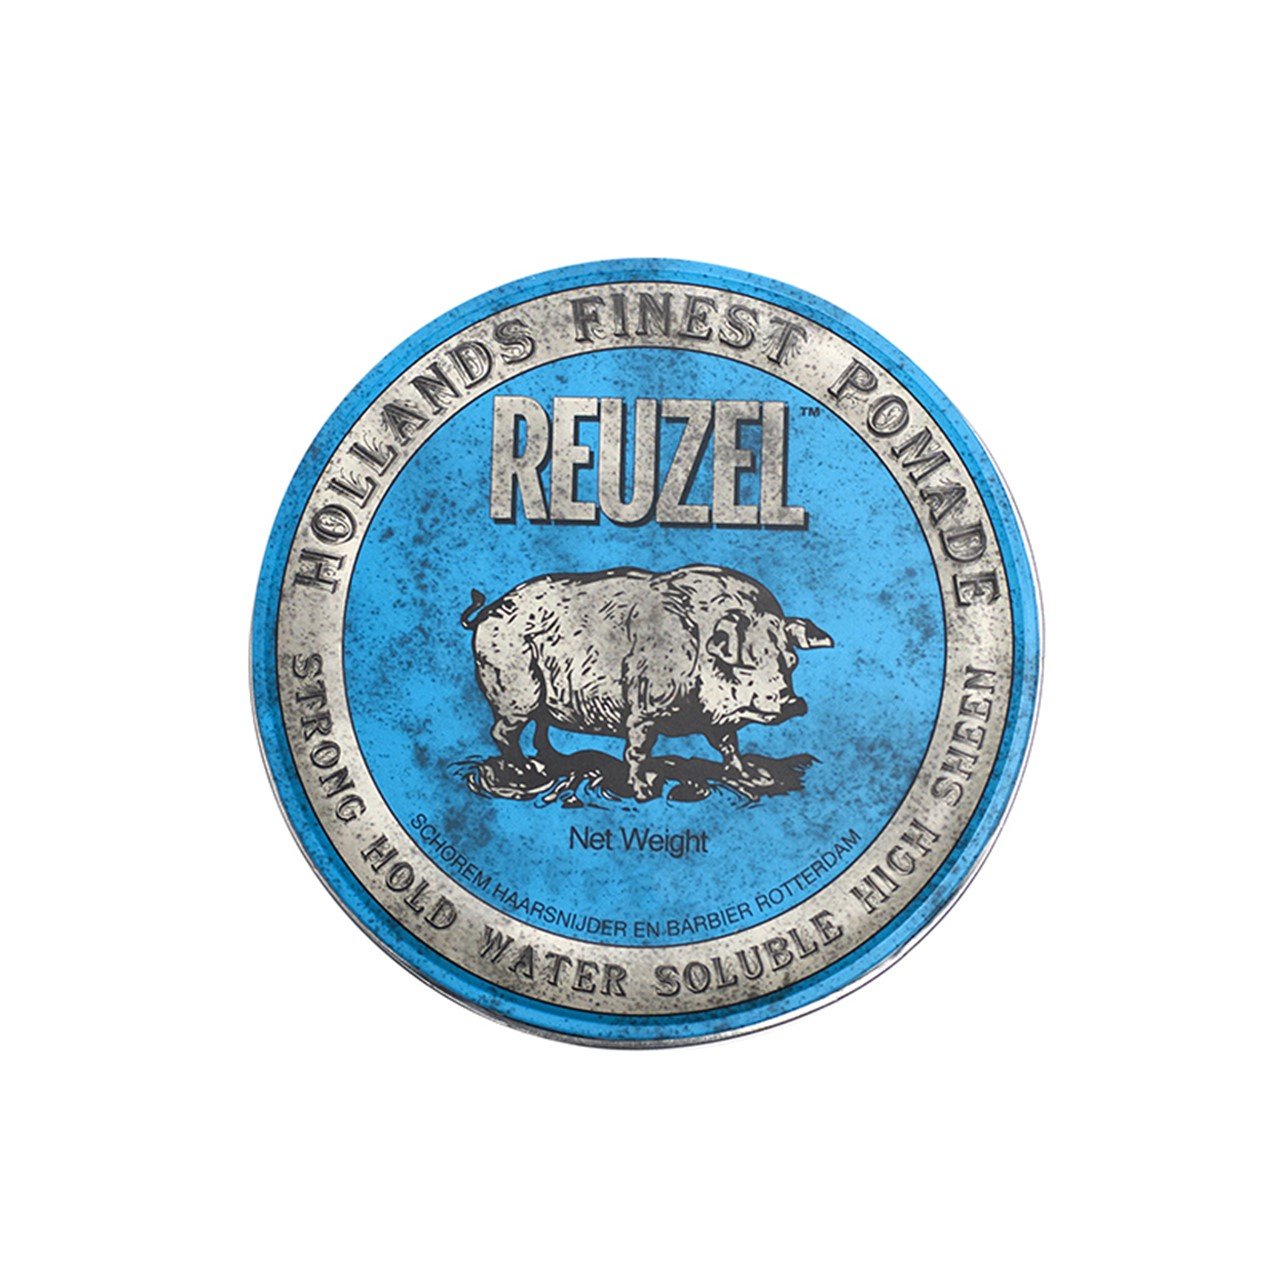 Reuzel Blue Pomade Strong Hold Water Soluble High Sheen 340g (11.99 oz)